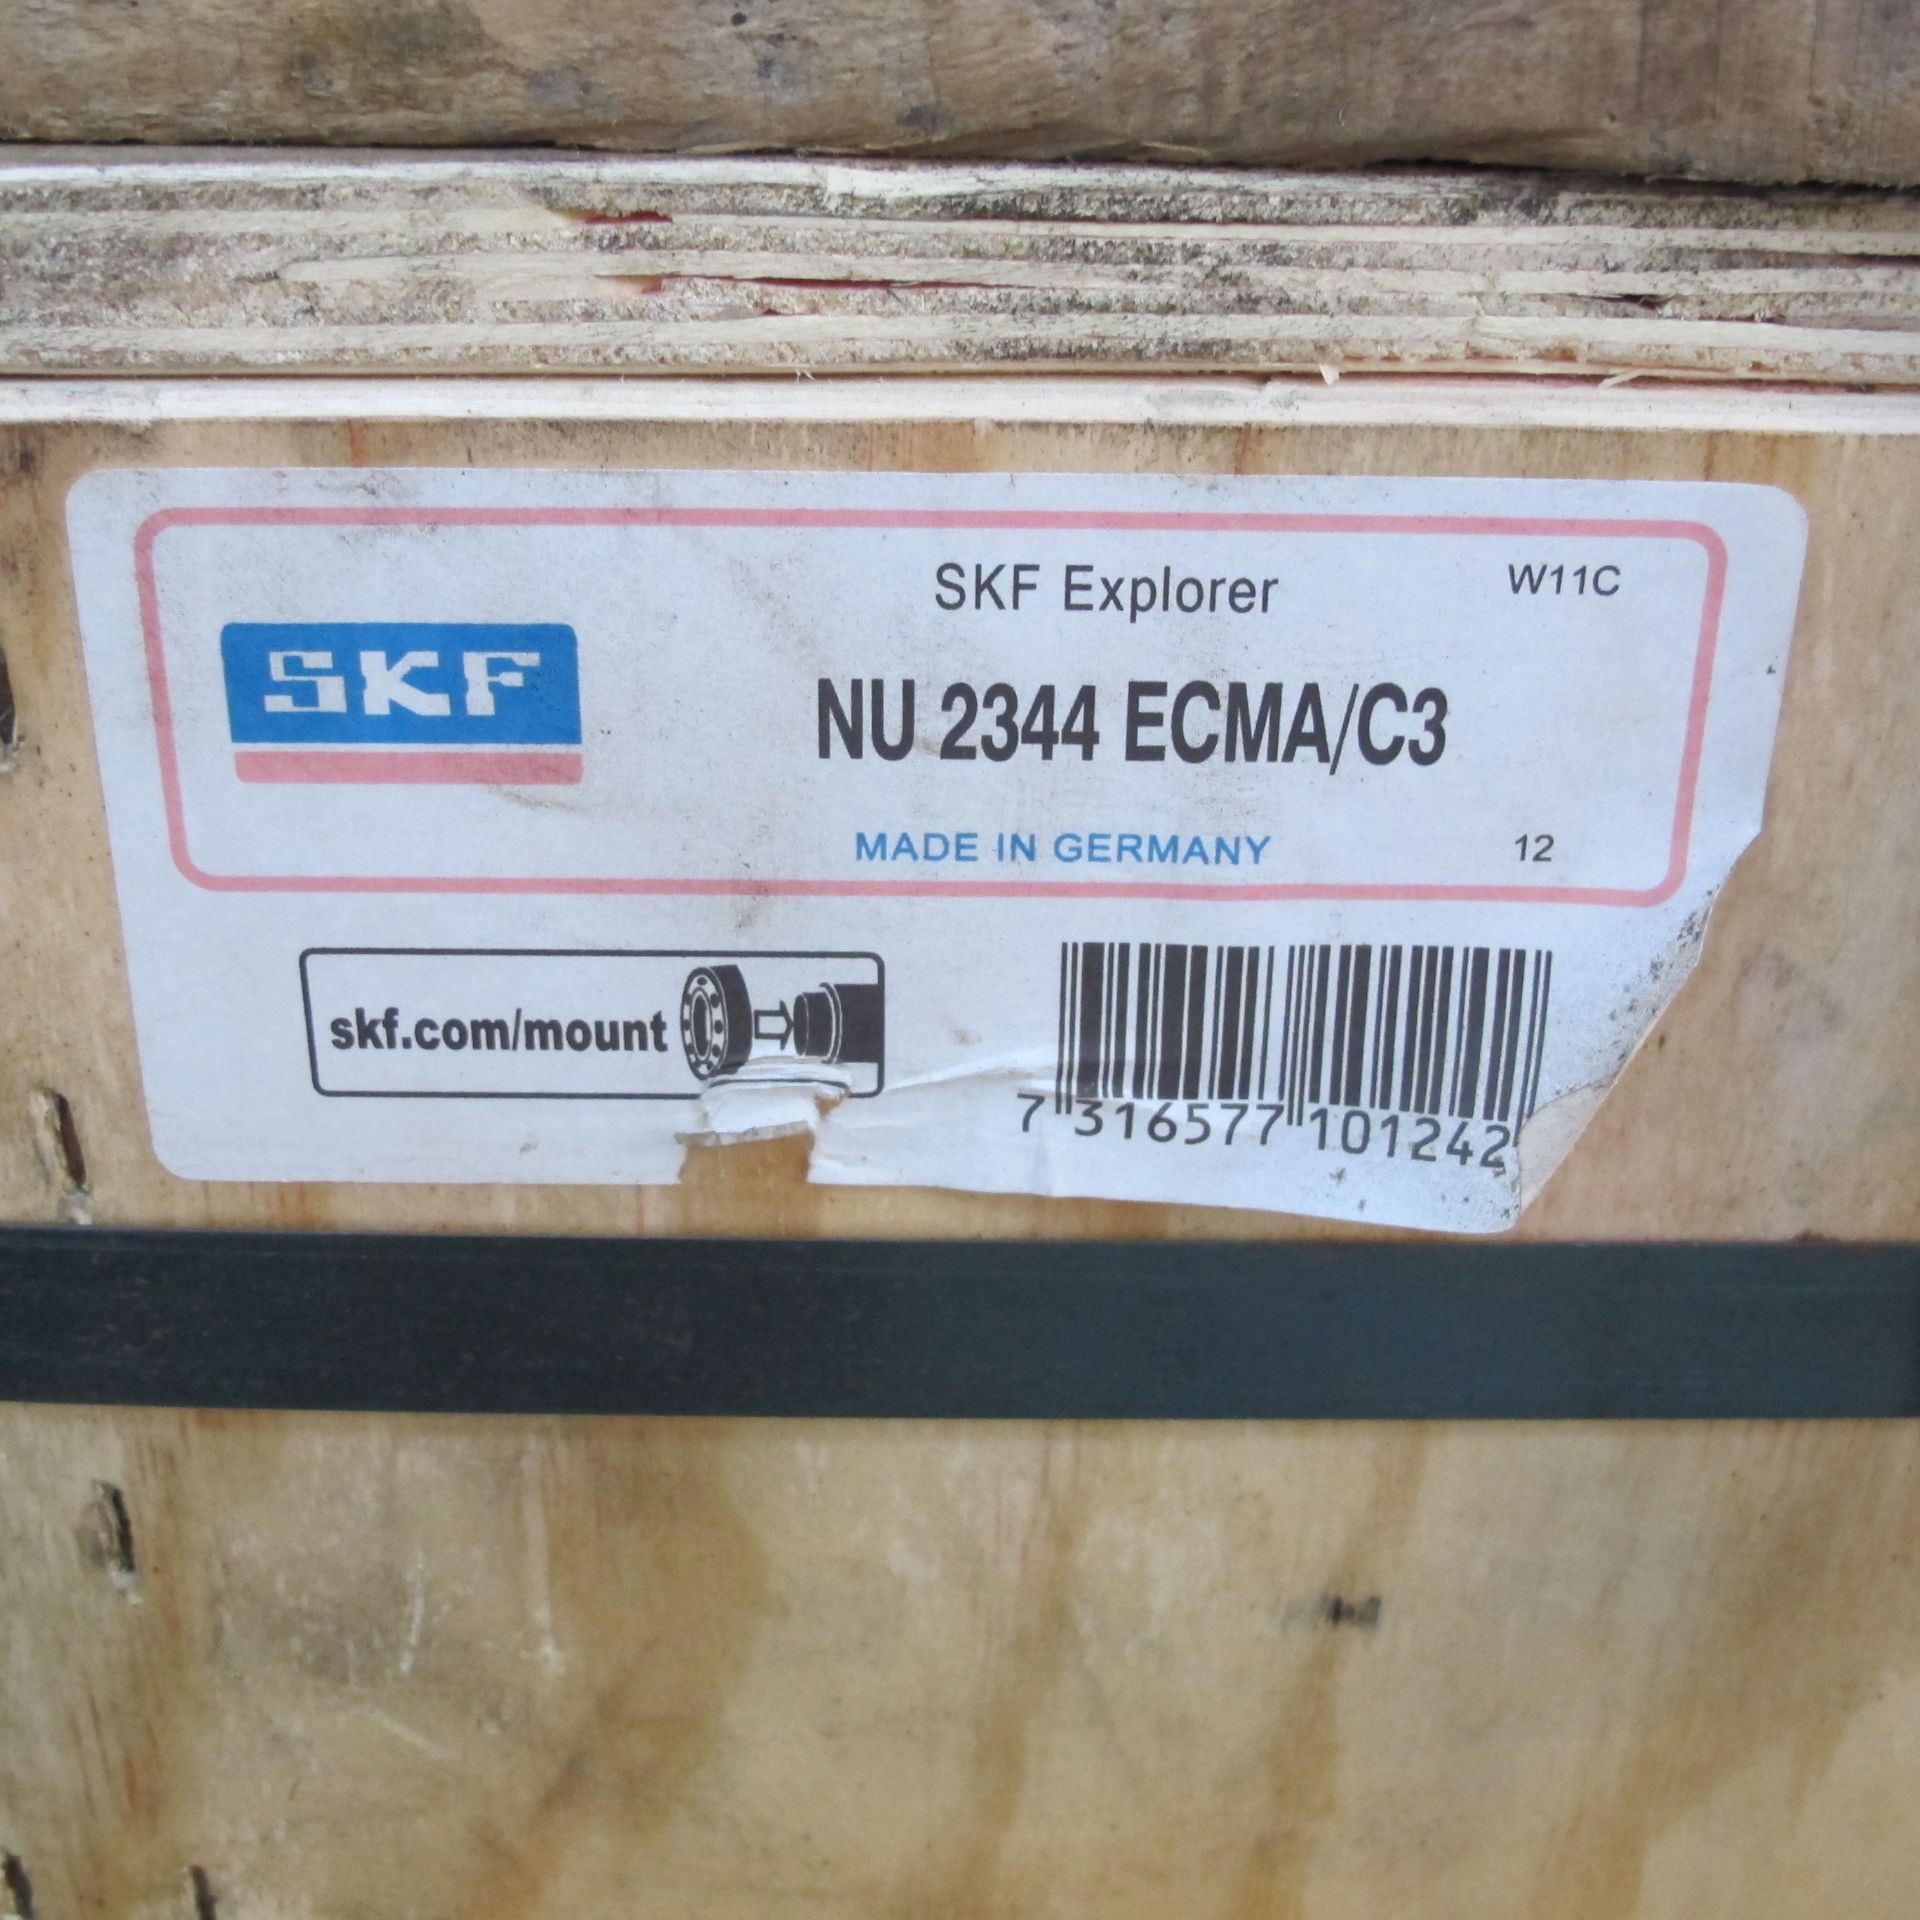 * 2 x SKF machine bearings - NU2344ECMA/C3 and NU2344ECMA/C3Please note there is a £5 + VAT Lift Out